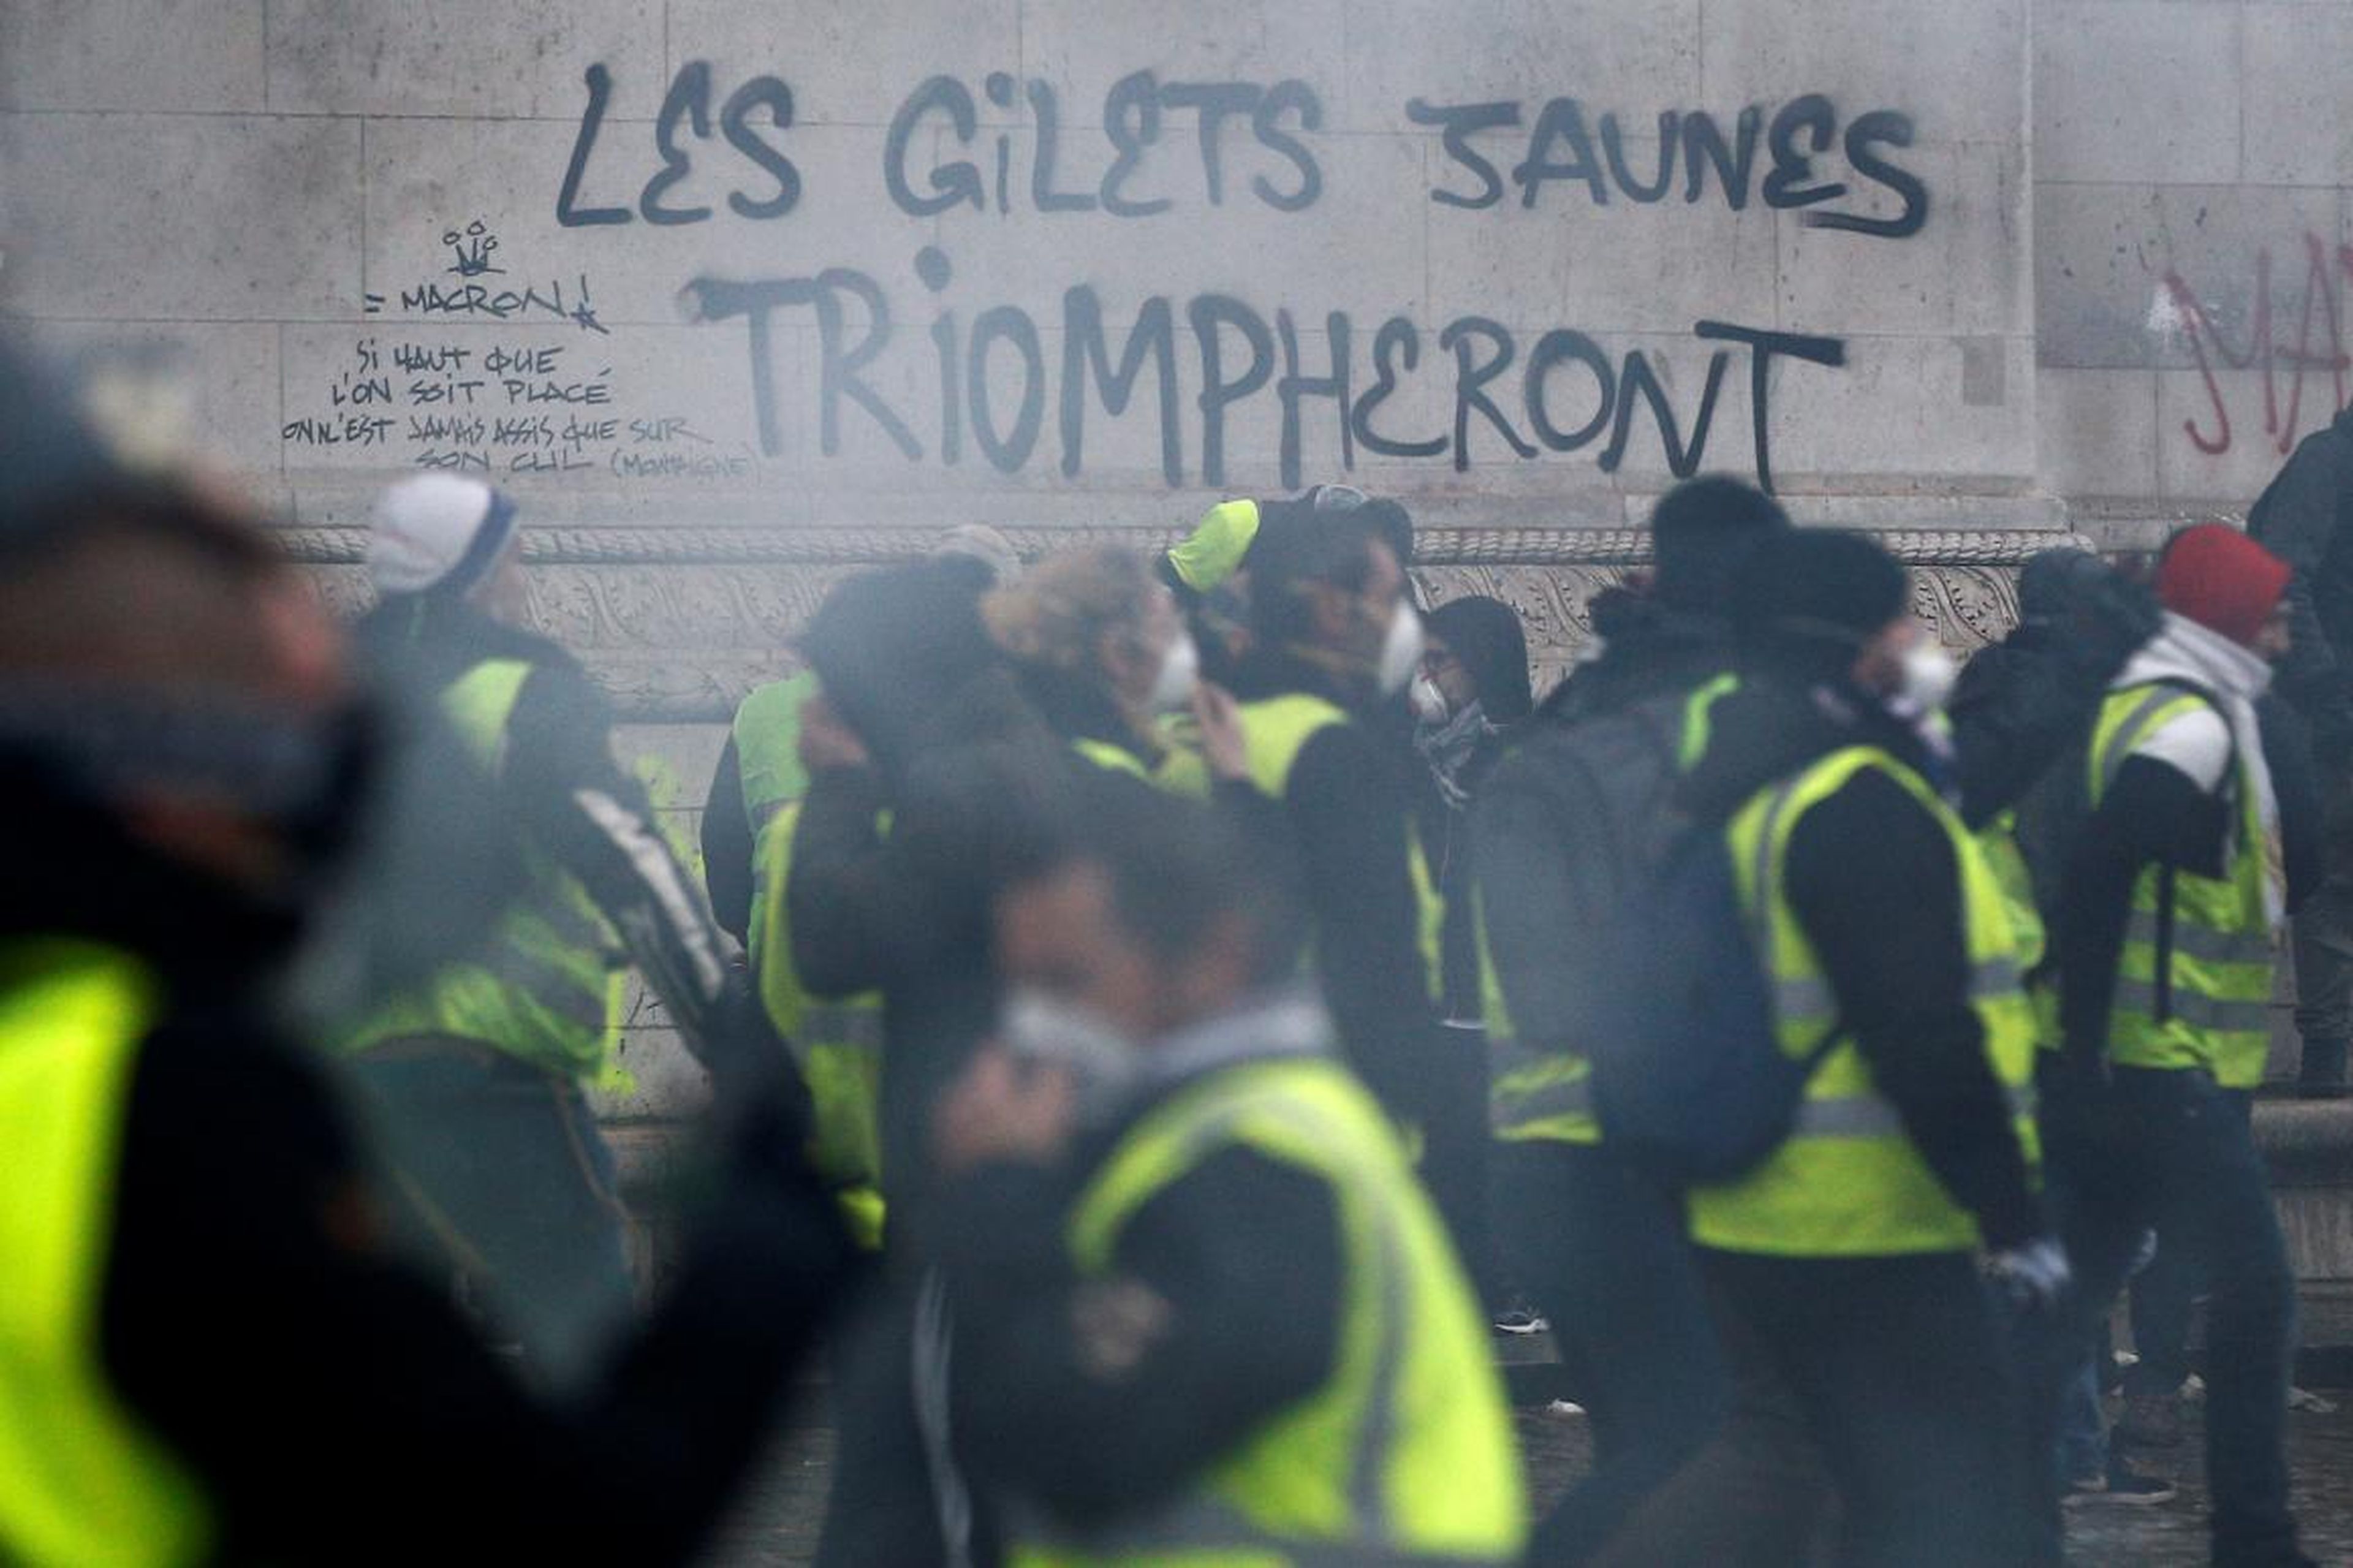 Graffiti saying "the yellow vests will triumph" and disparaging the French president was scrawled on monuments like the Arc de Triomphe.